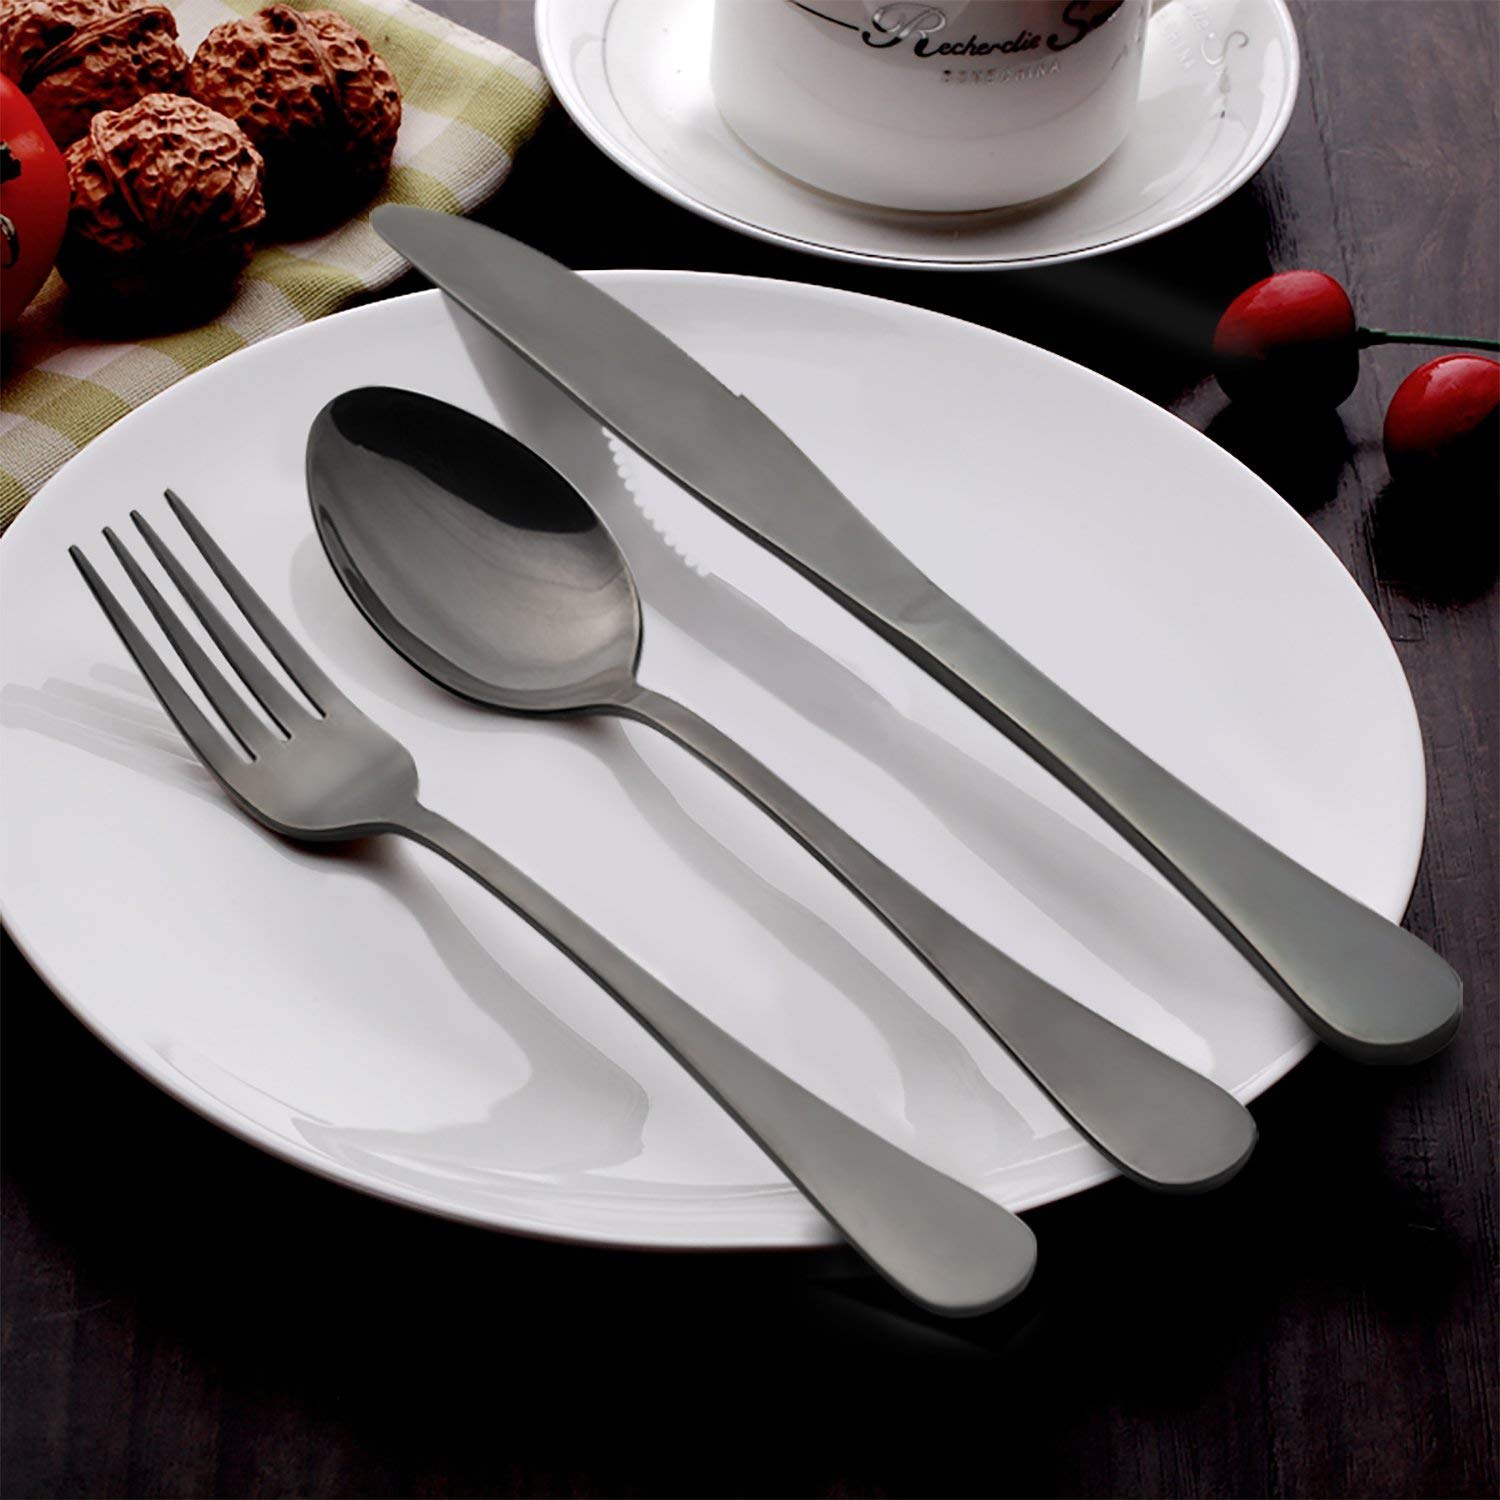 Matte Black Home & Hotel Cutlery for Kitchens | Spoon Set Of 32 - Star Work 